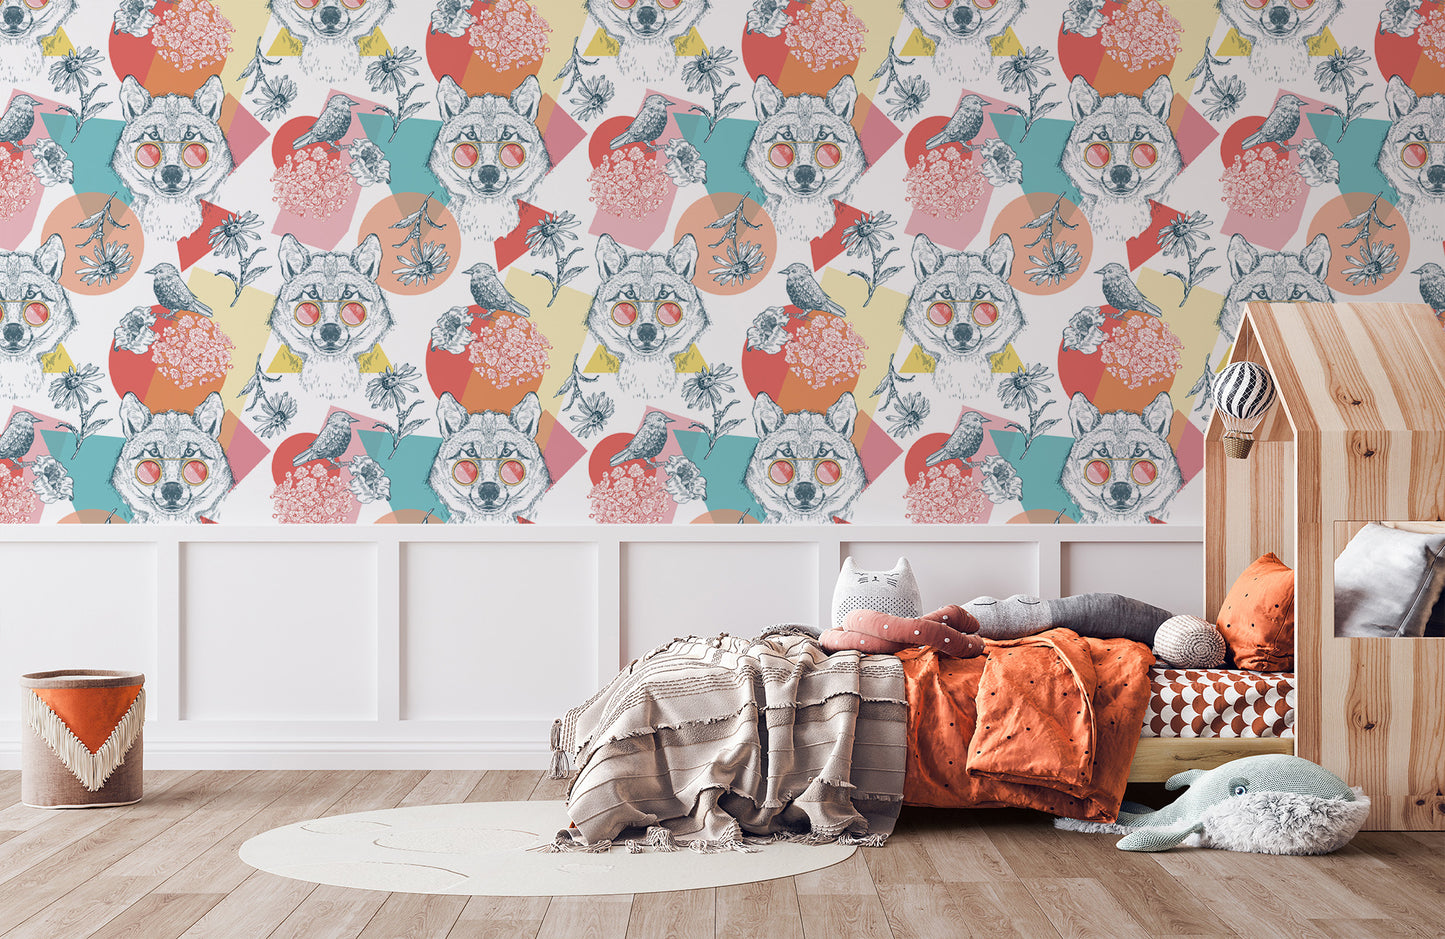 Wallpaper in kids room featuring birds, flowers, and a wolf with sunglasses